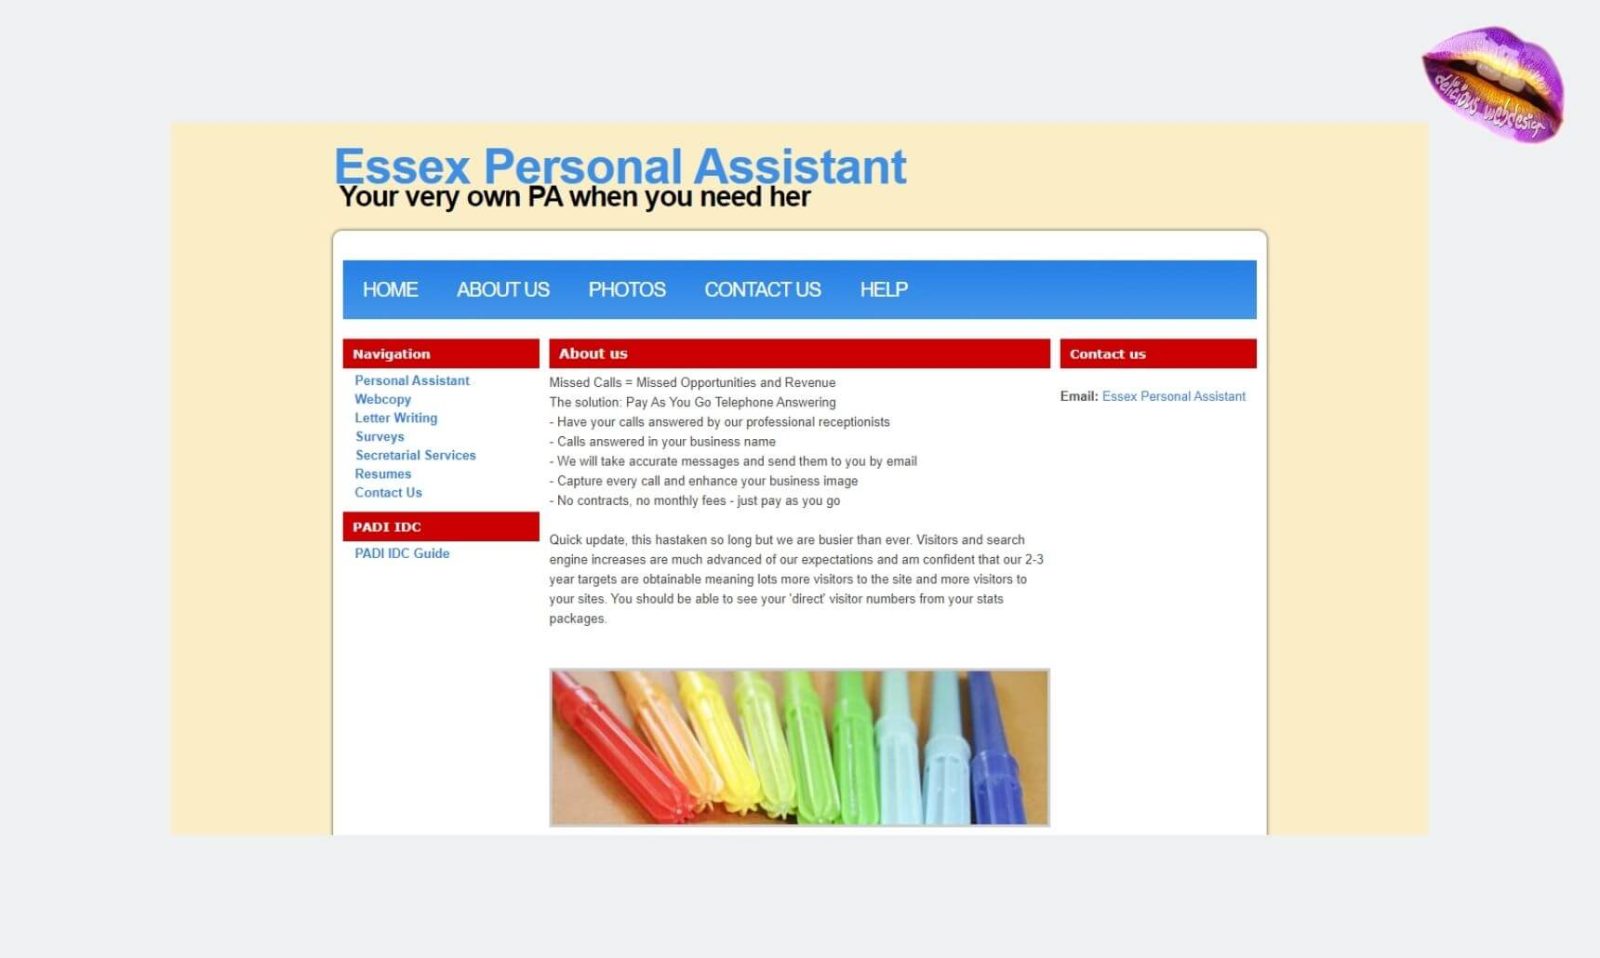 Essex Personal Assistant